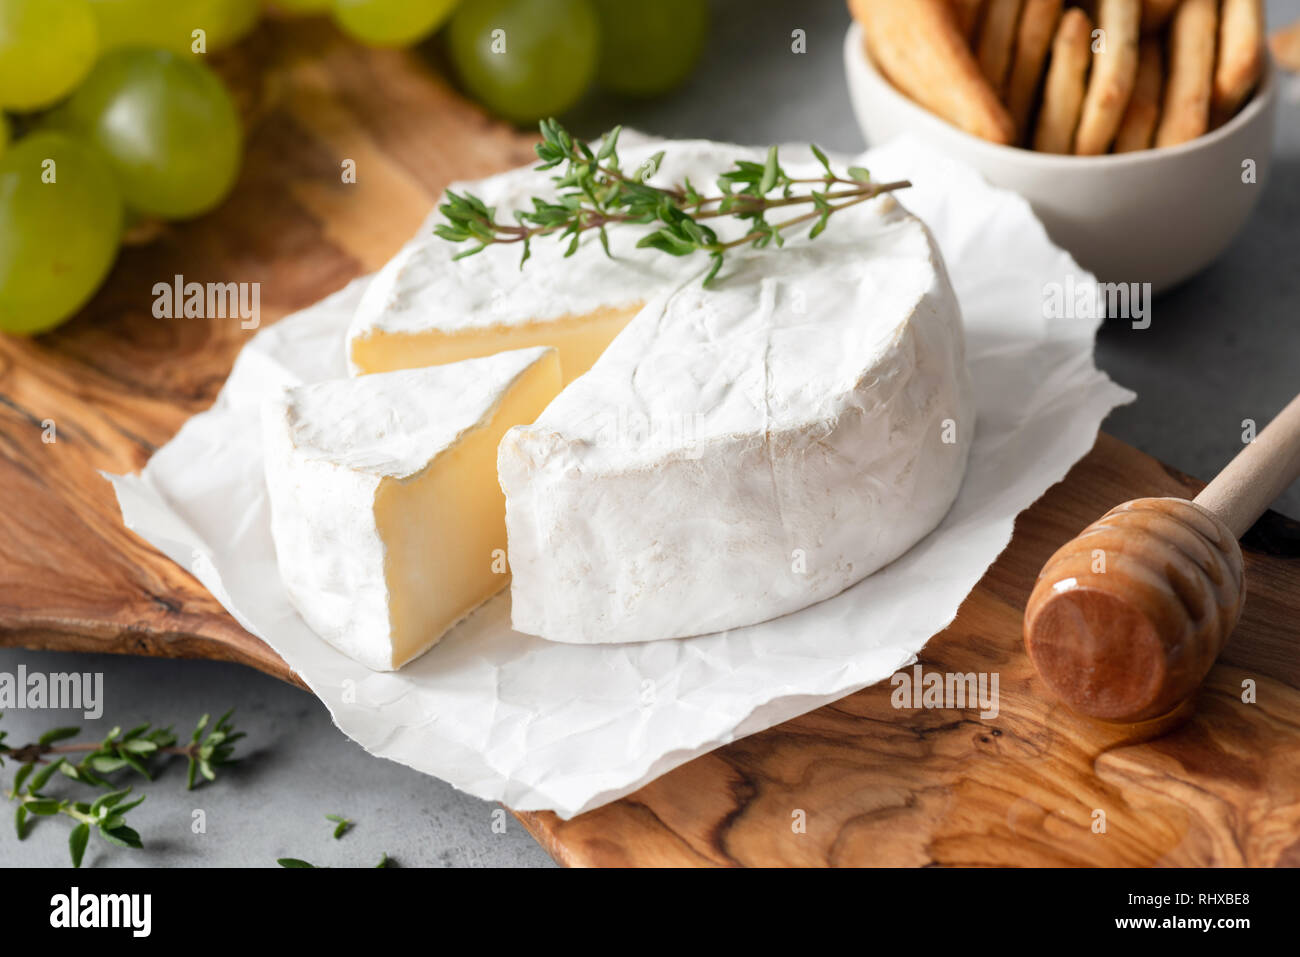 Tasty Brie Cheese or Camembert Cheese On Olive Wooden Serving Board. Closeup view Stock Photo